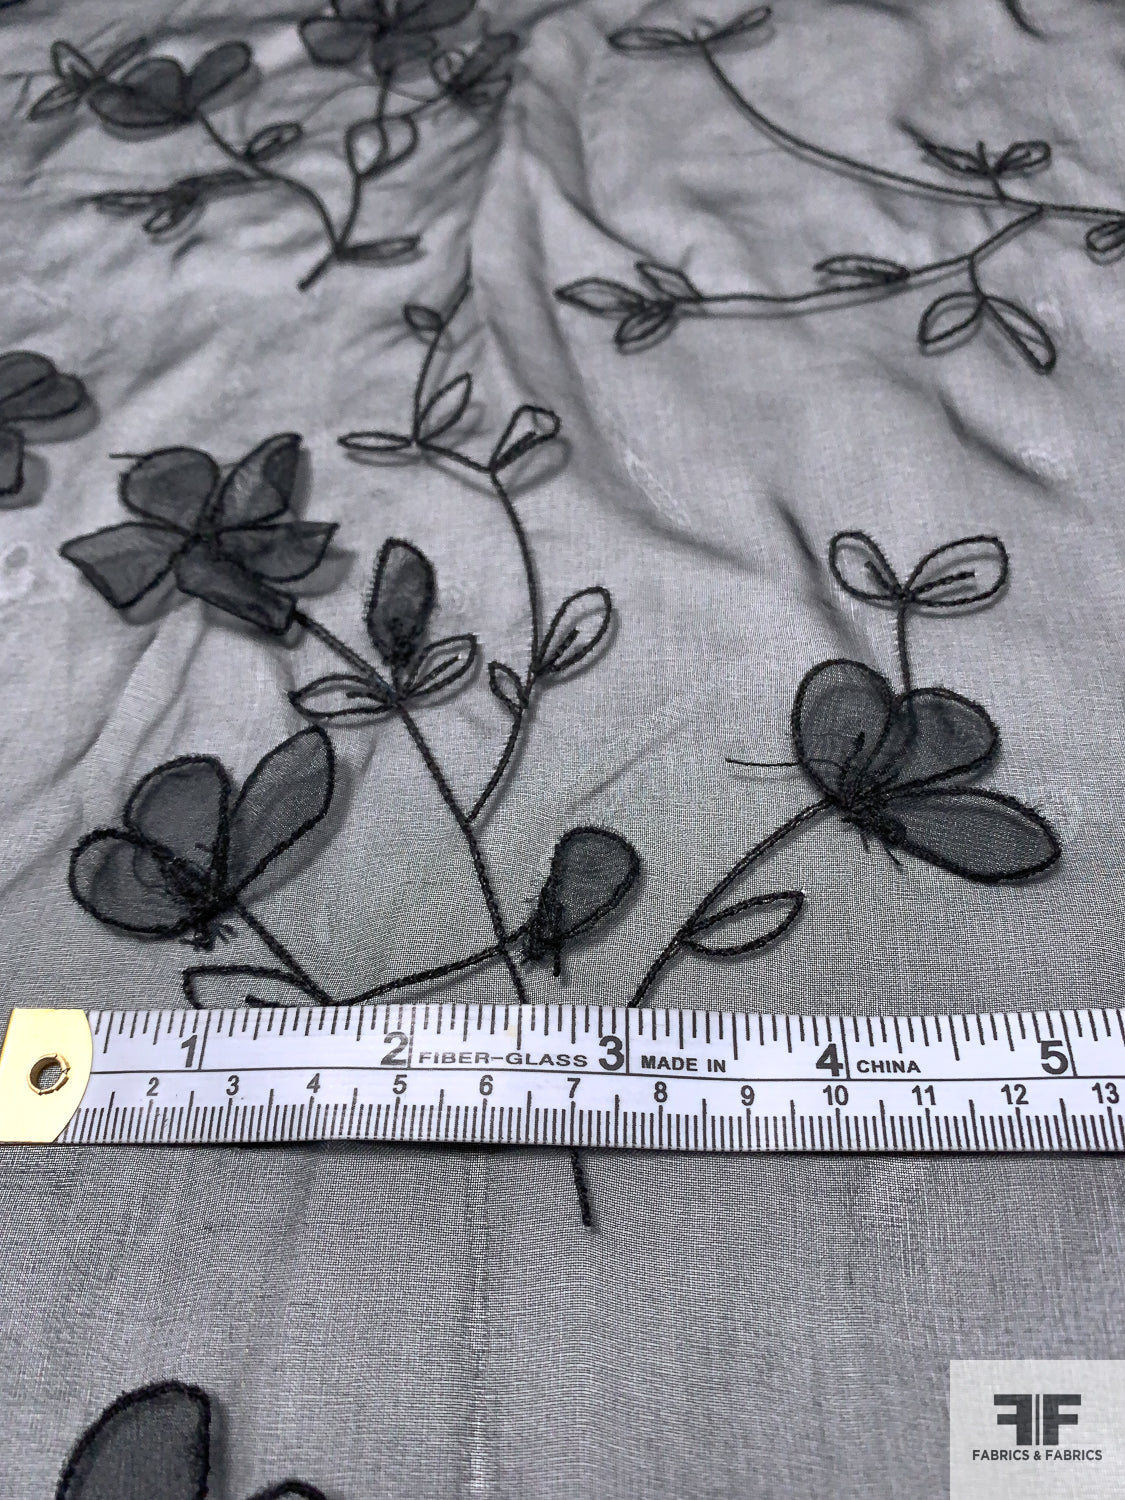 The widely used embroidered fabric: novelty embroidered mesh fabric